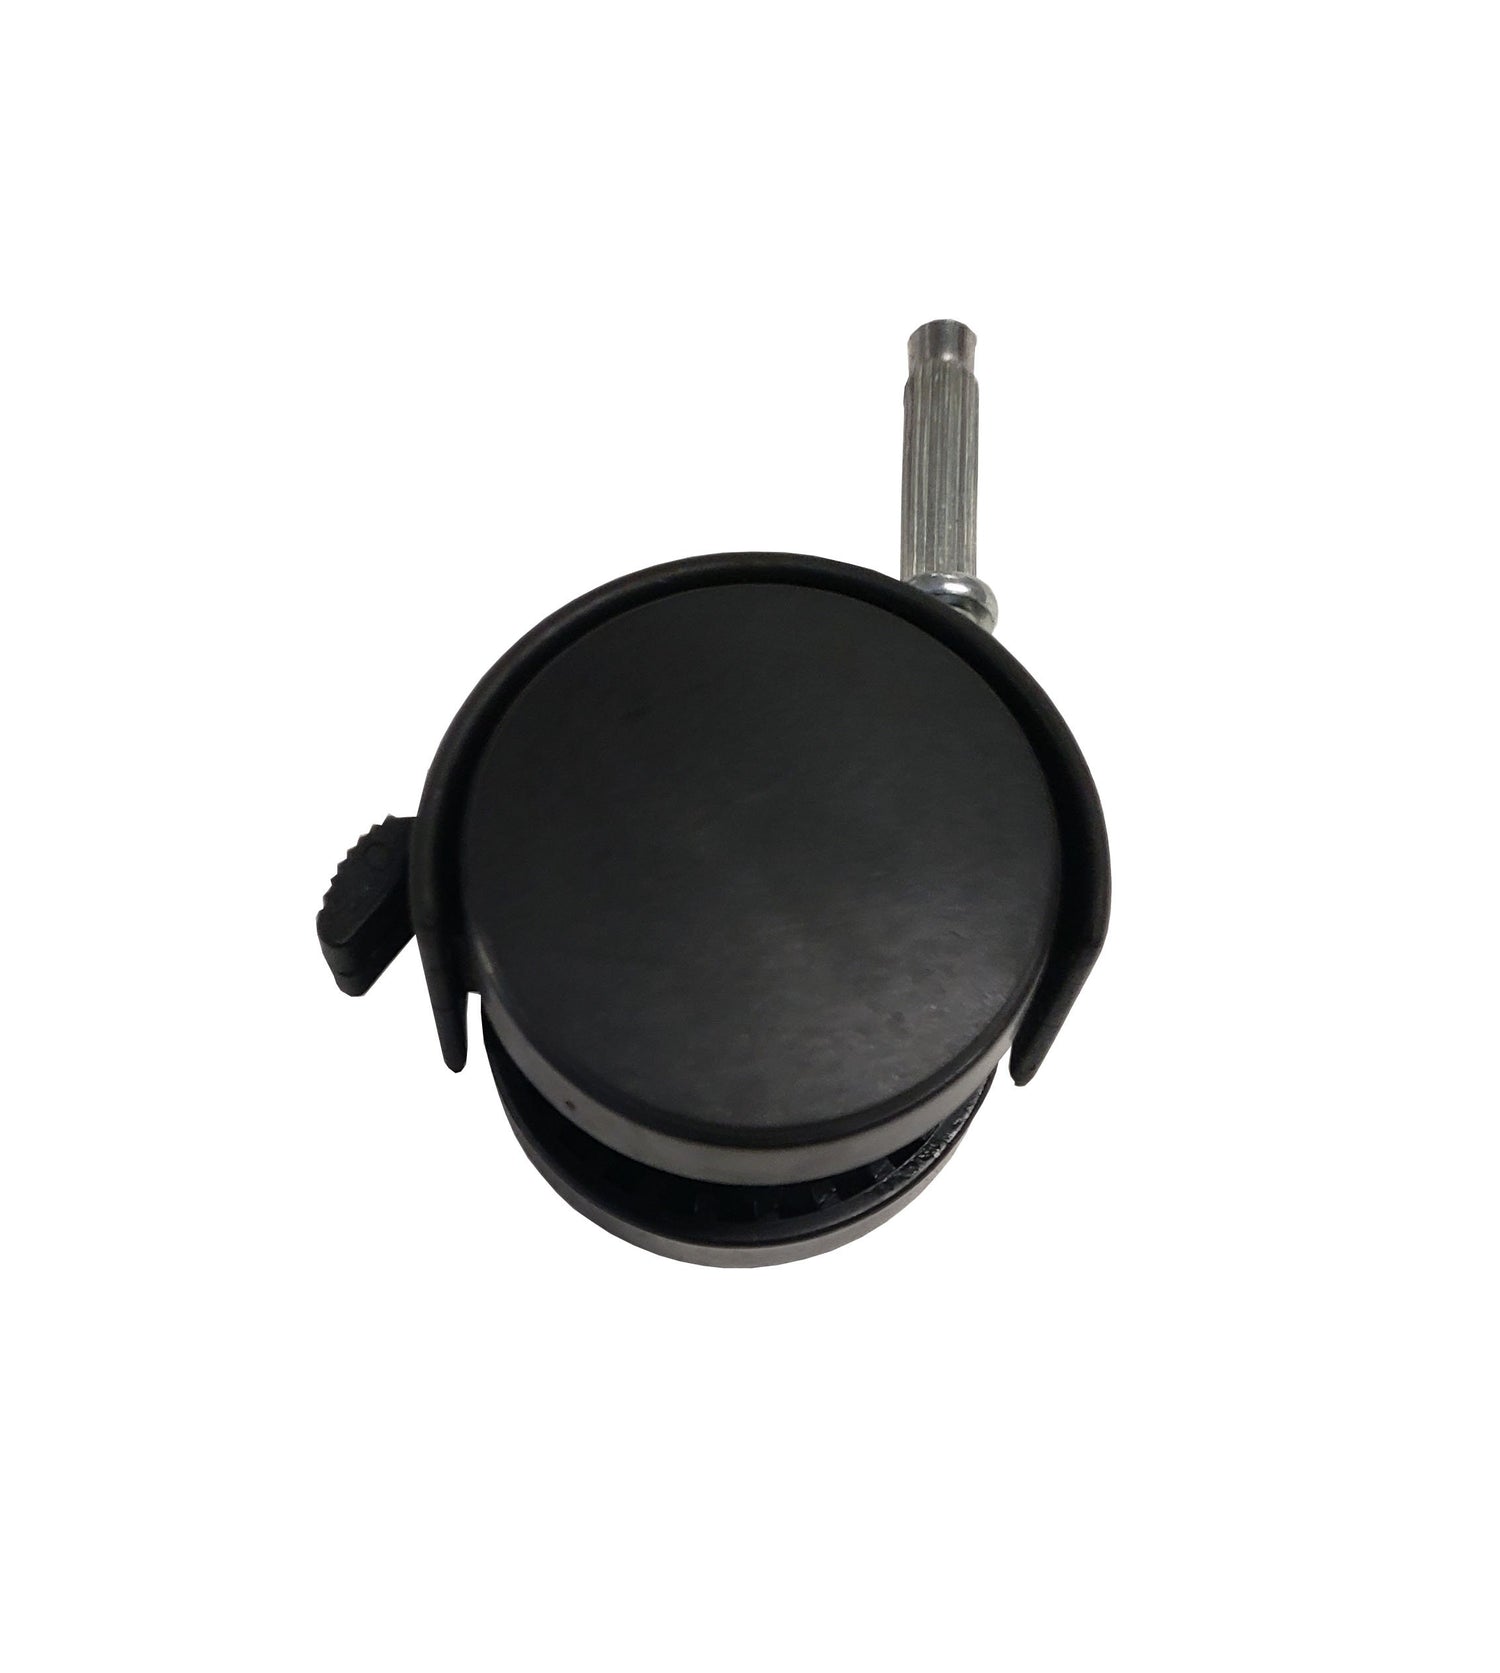 Broil King 1089213 push in caster. A wheel that doesn’t spin is a useful as a burner that won’t light. Order yours today to make sure you’re ready to move the grill around come winter time. Nobody likes walking all the way across the deck to get to a cold BBQ. Available at Barbecues Galore.